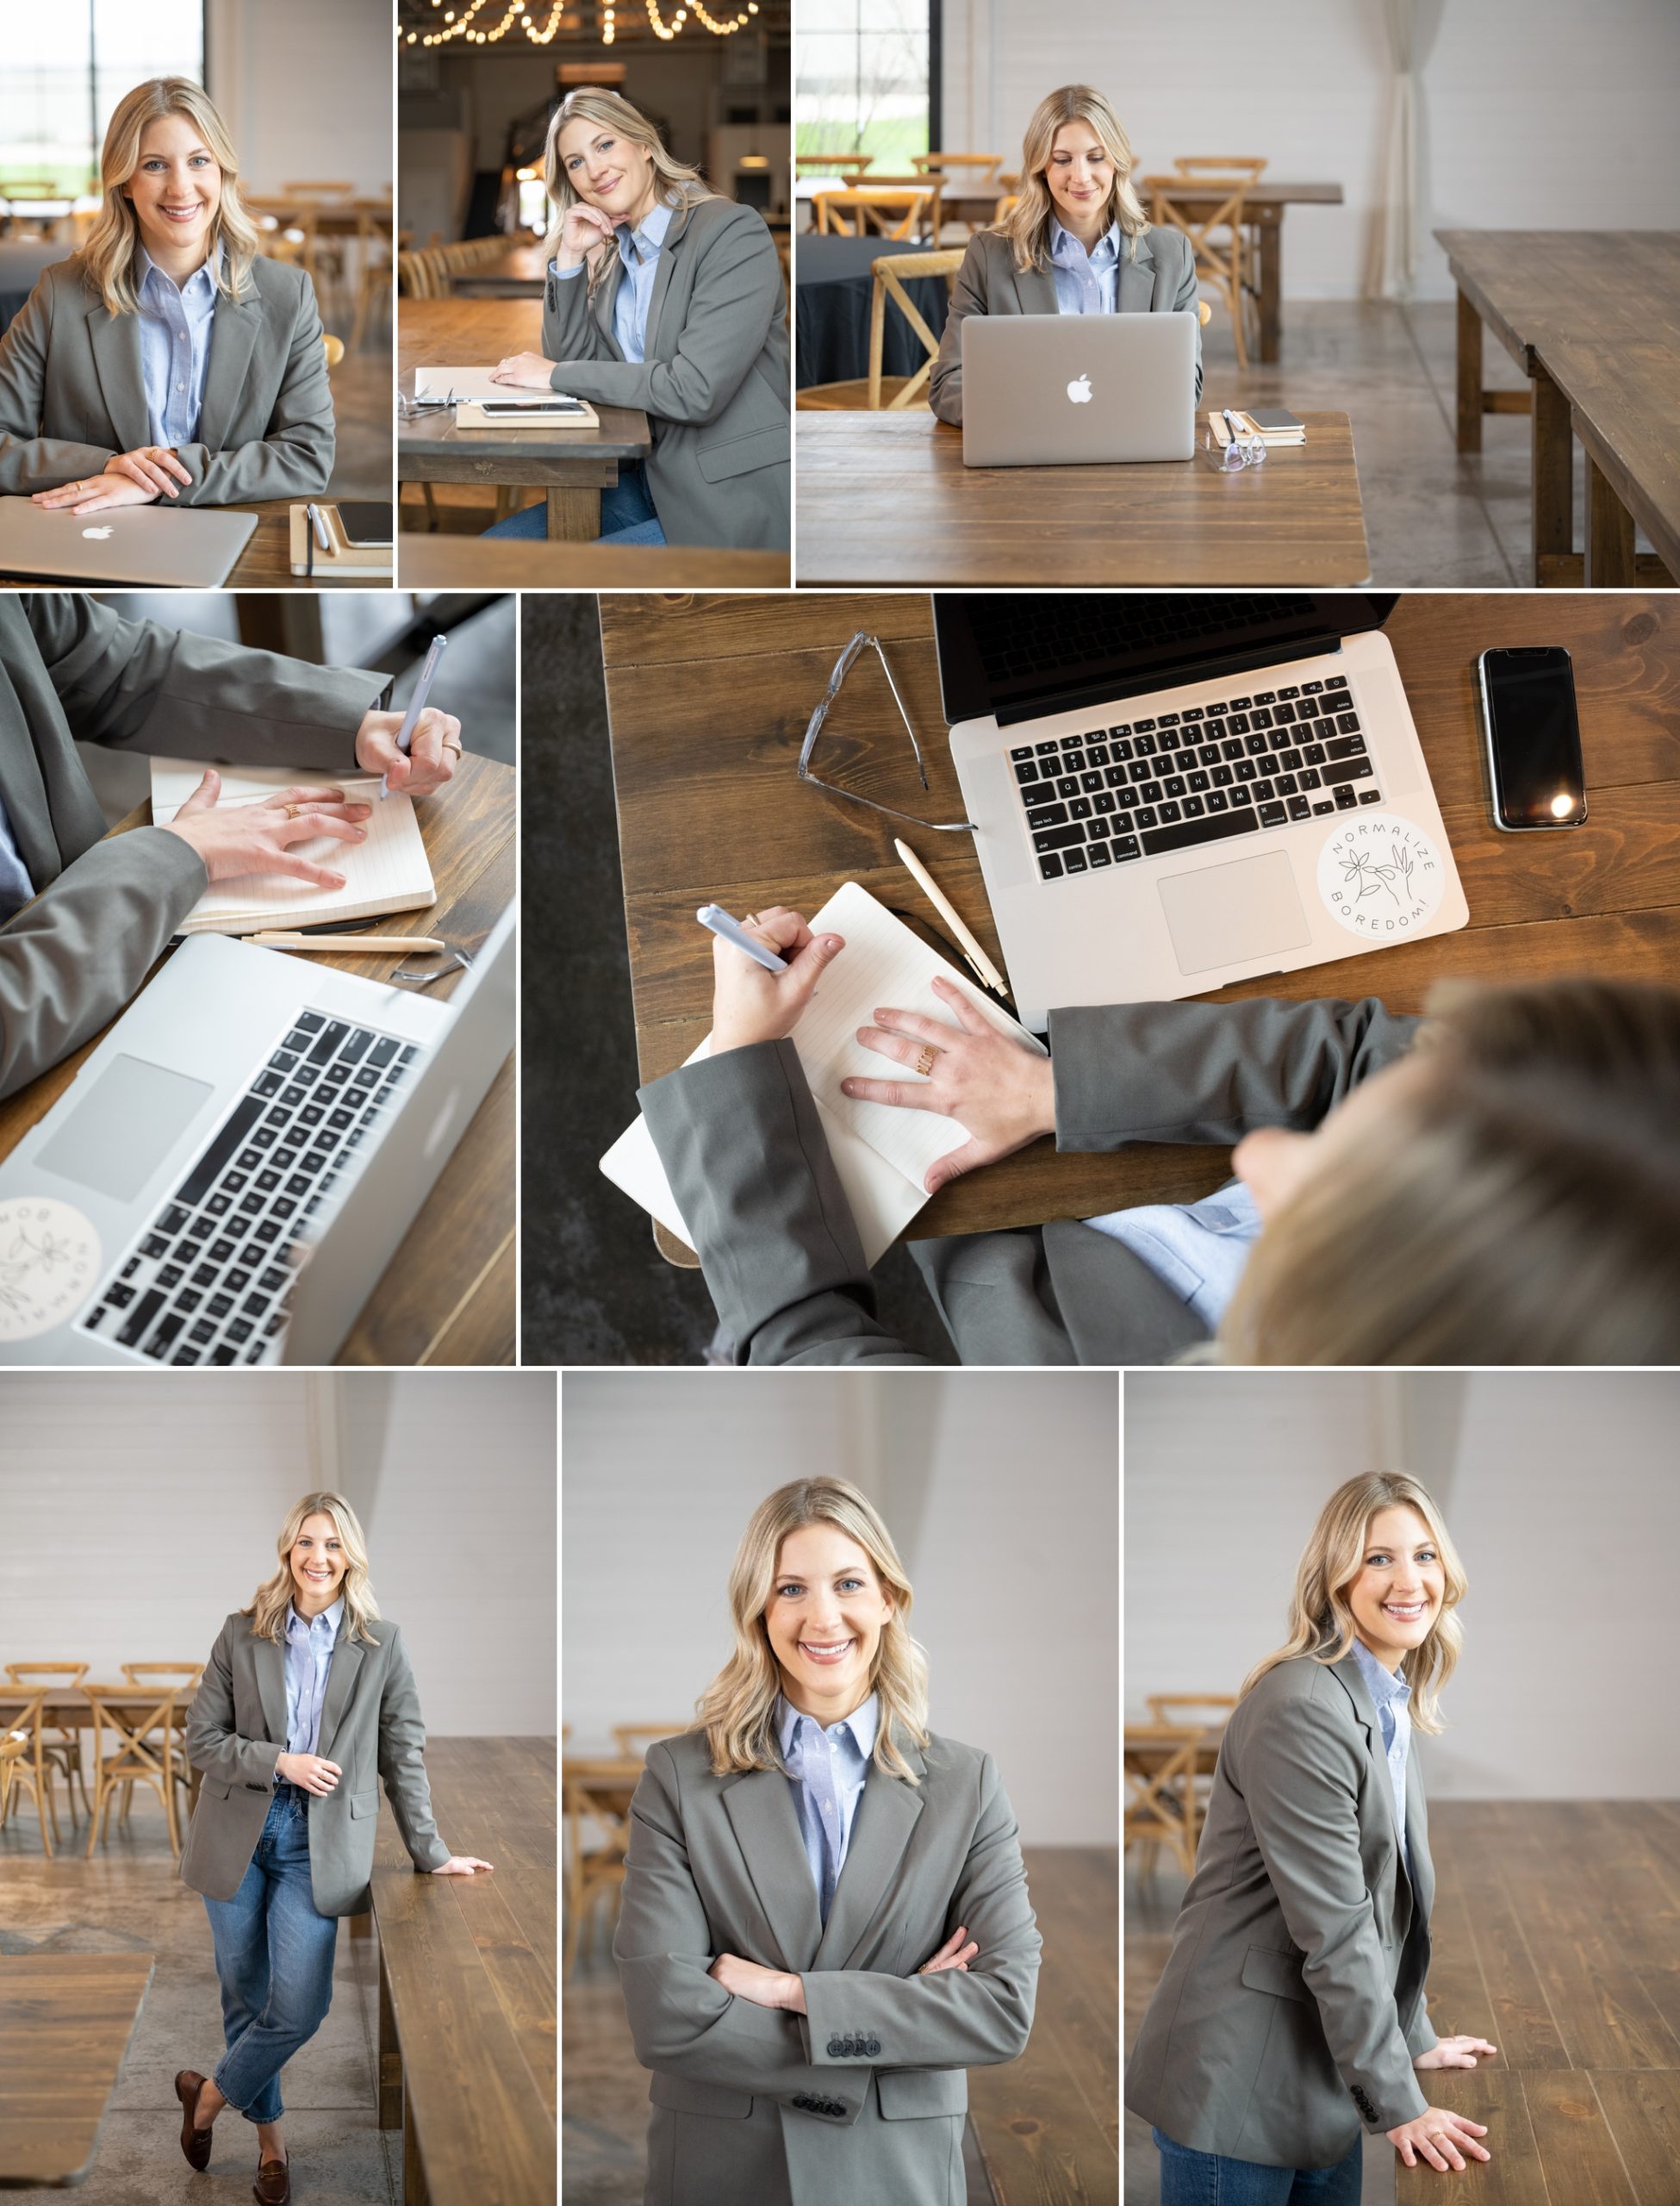 A collage of brand images of a blonde female entrepreneur sitting at a brown wooden table with her apple laptop, pens, journal and phone.